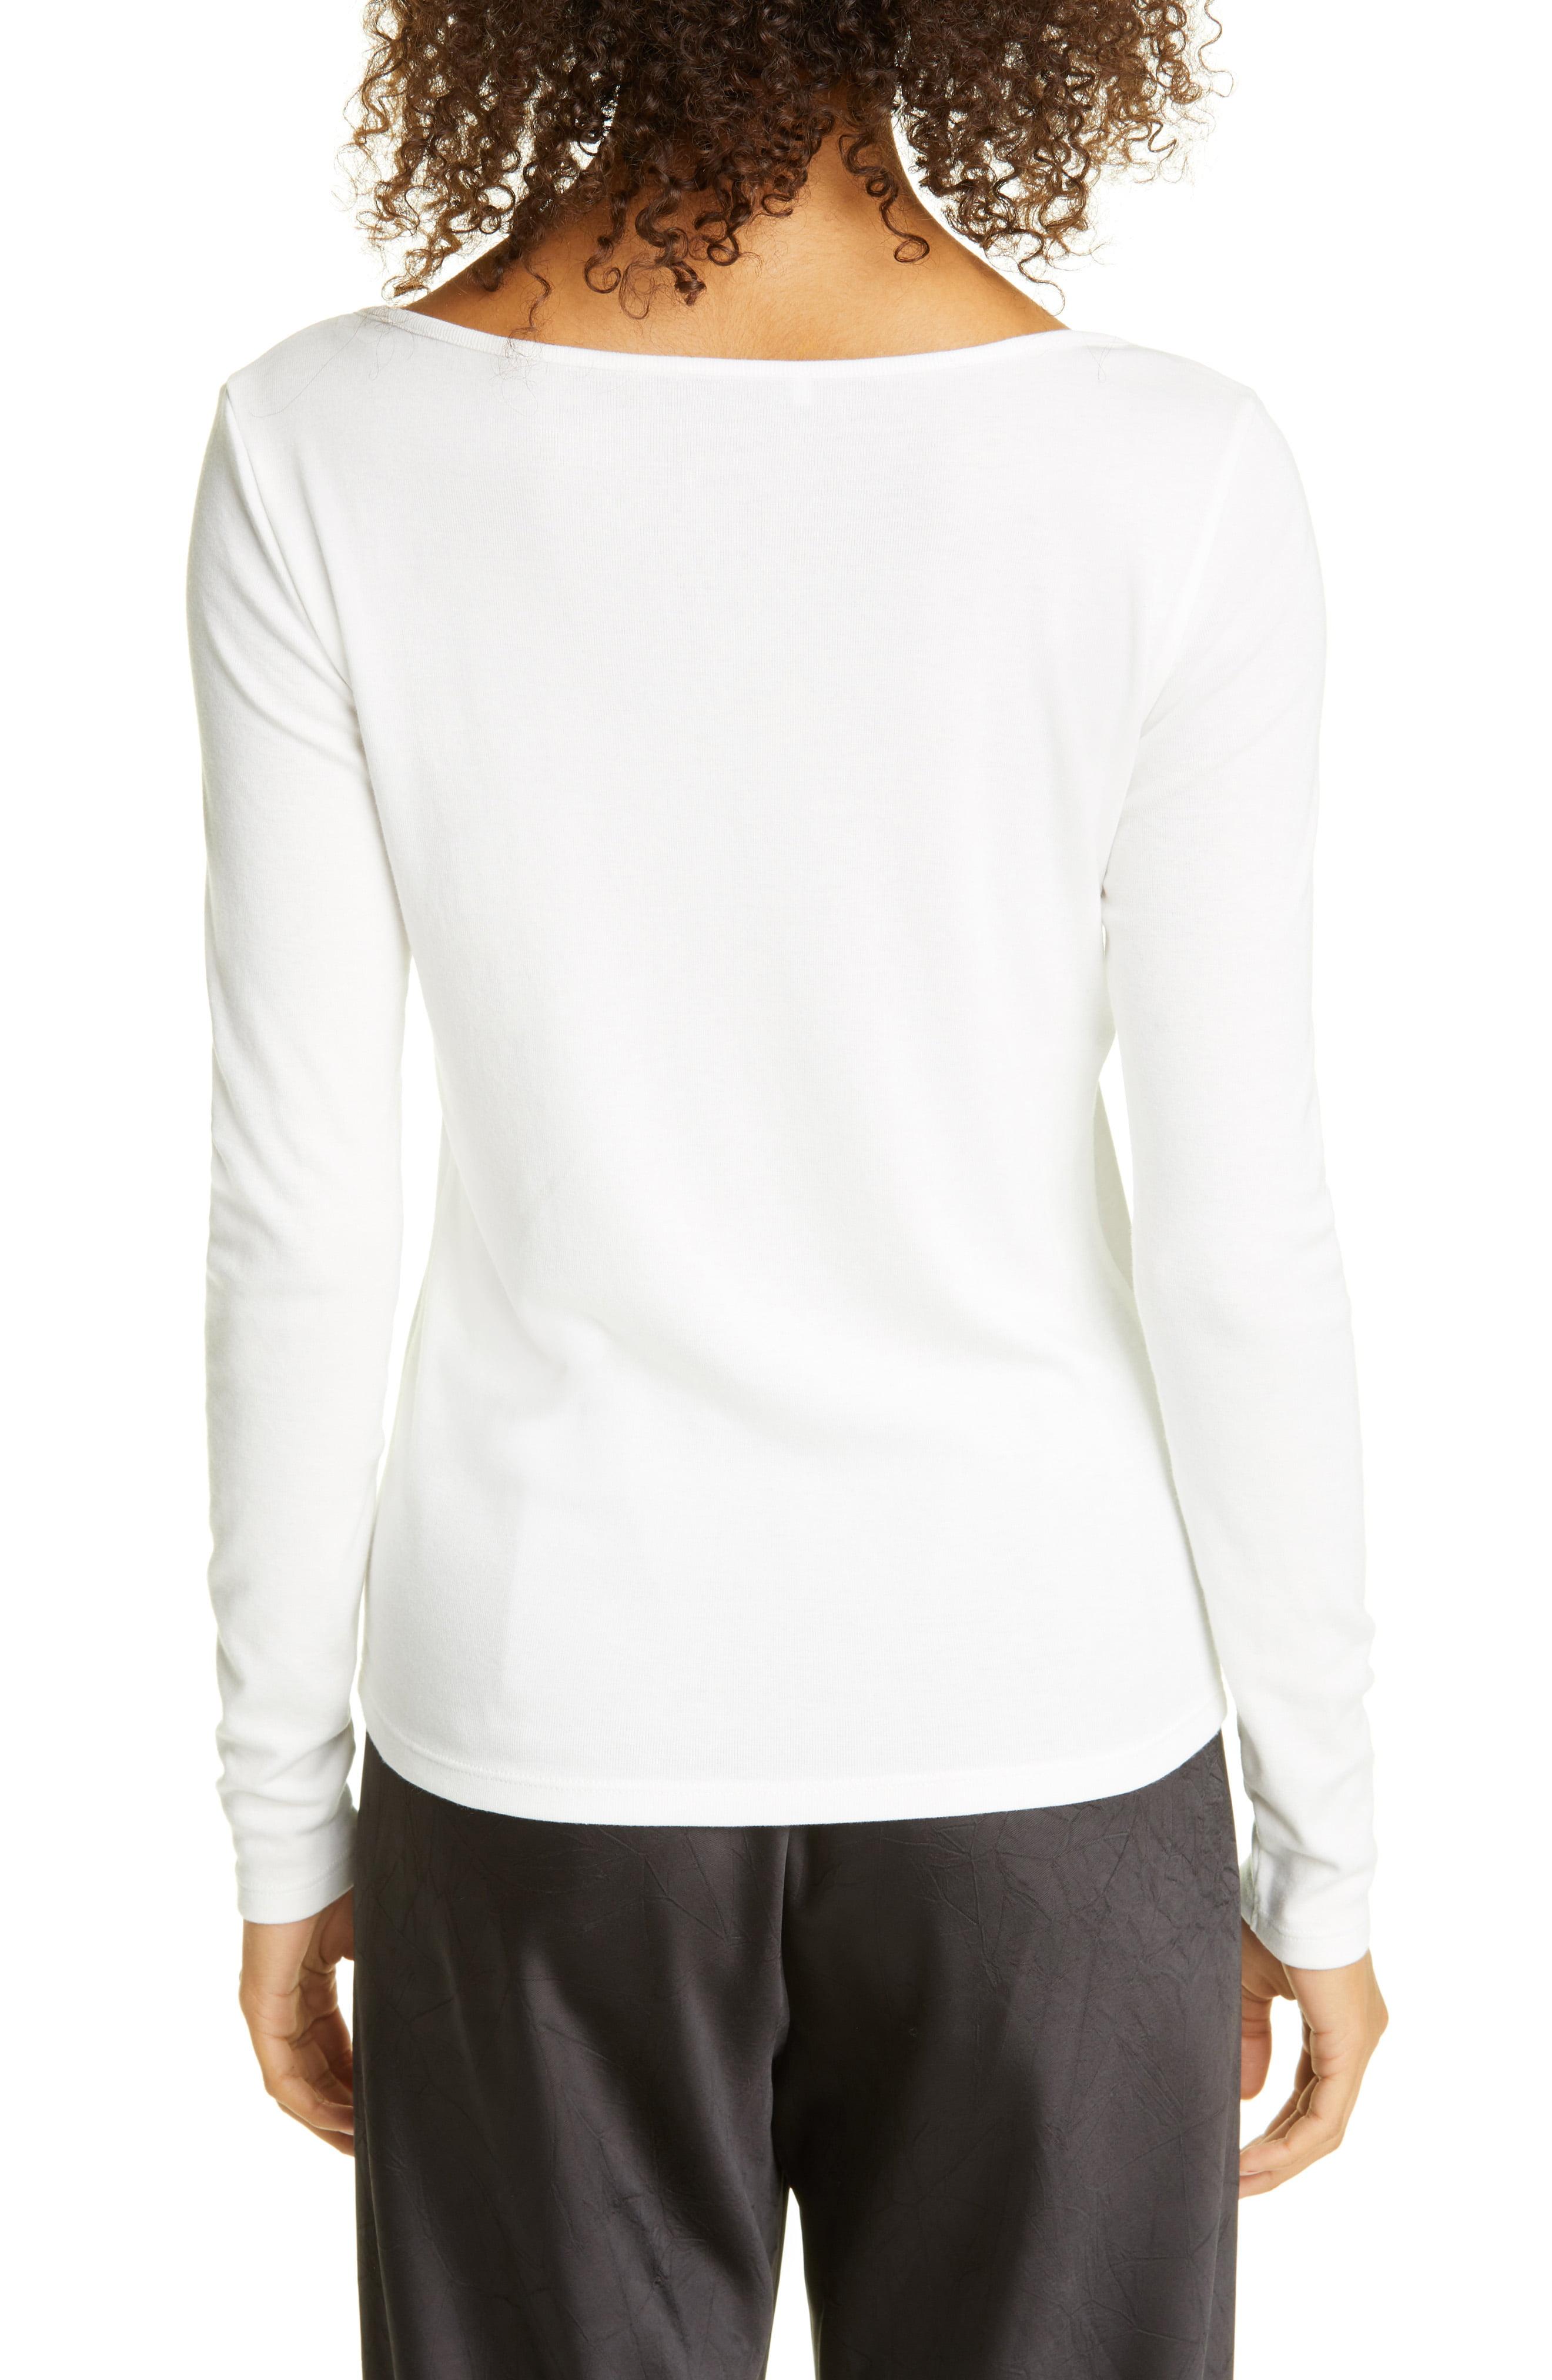 Vince Cotton Square Neck Long Sleeve Top in White - Lyst